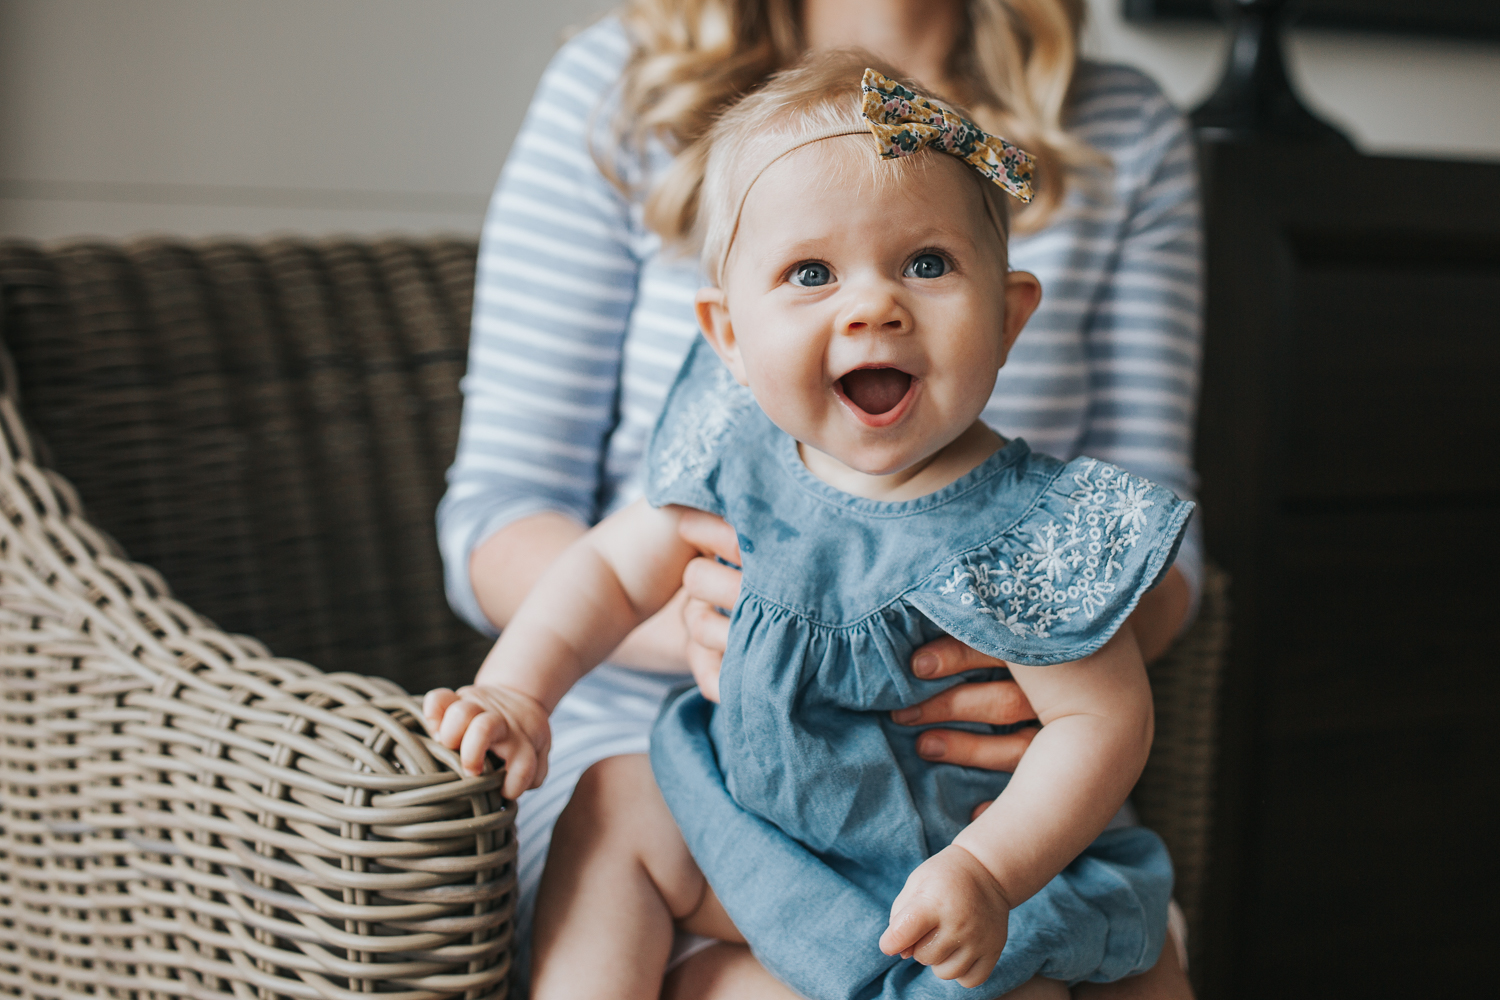 6 month old baby girl in blue dress sitting on mom's lap laughing - Barrie Lifestyle Family Photos